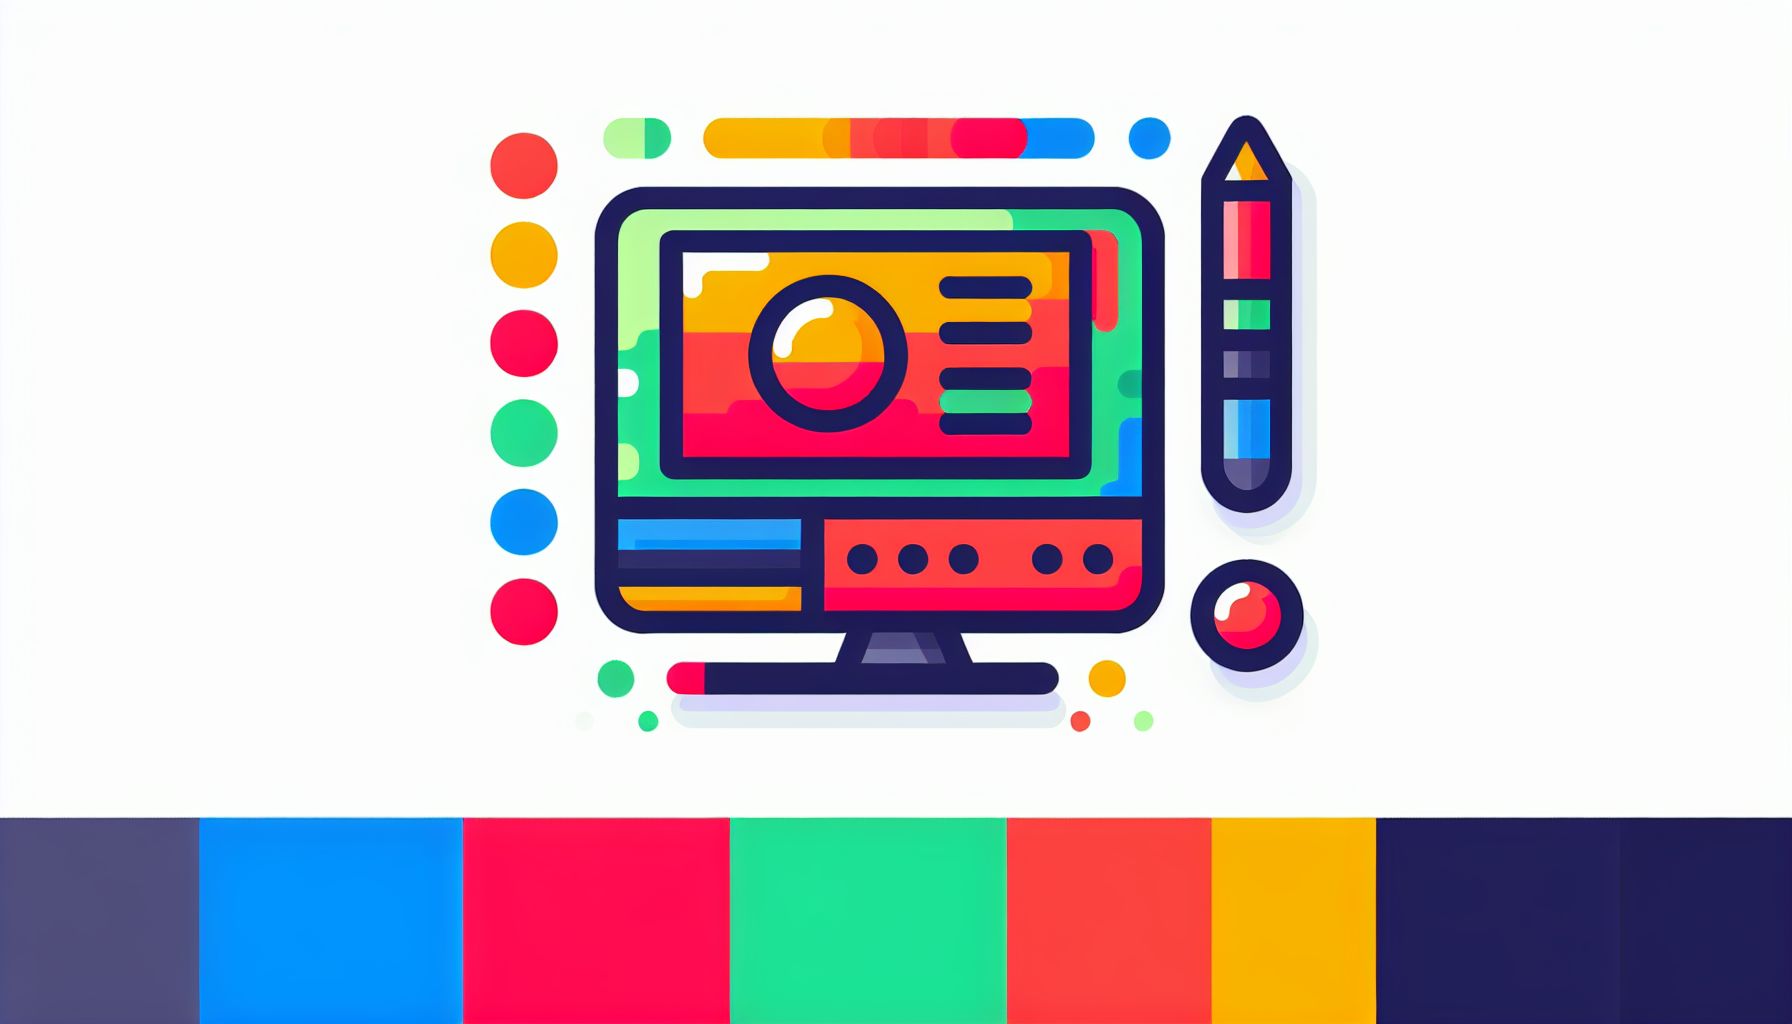 Computer in flat illustration style and white background, red #f47574, green #88c7a8, yellow #fcc44b, and blue #645bc8 colors.